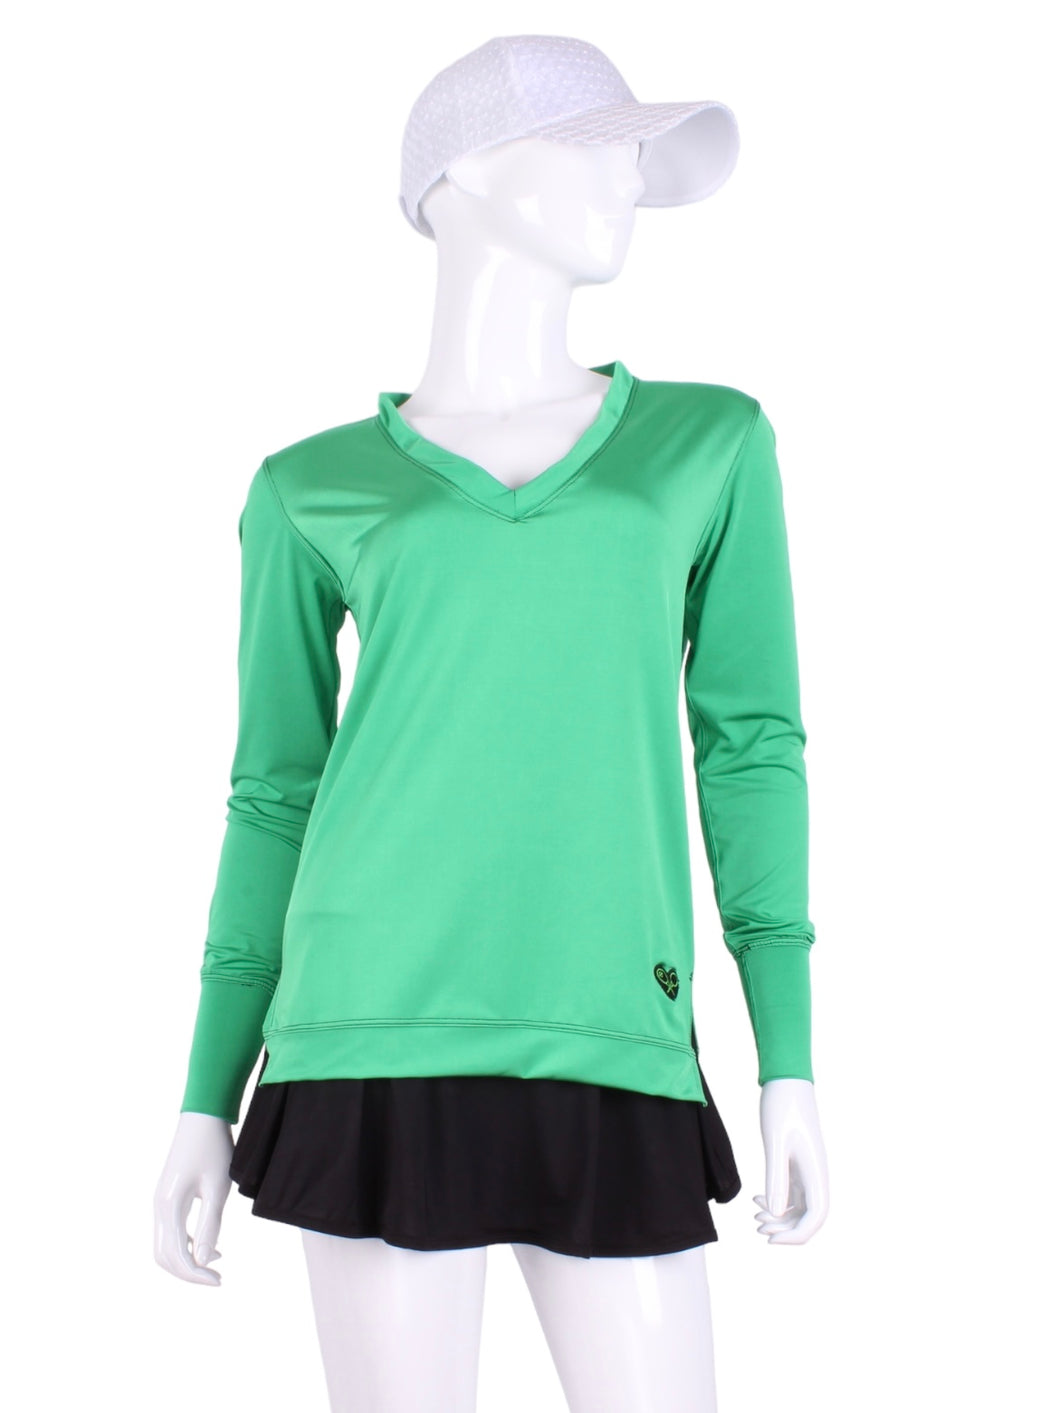 Green Long Sleeve Very Vee Tee. This top is soooo gorgeous!    It’s called the Long Sleeve Very Vee Tee - because as you can see - the Vee is - well you know - VERY VEE!  For the tennis lady who loves to leave her chest open - but cover her arms (and other bits) this top is seductive in a sweet way!  You feel nearly naked in it.  So go ahead - hit that ace!  Flattering and free - that’s what this top is.  The most preppy of my tops - looks just as good tied around the shoulders as it does on! 